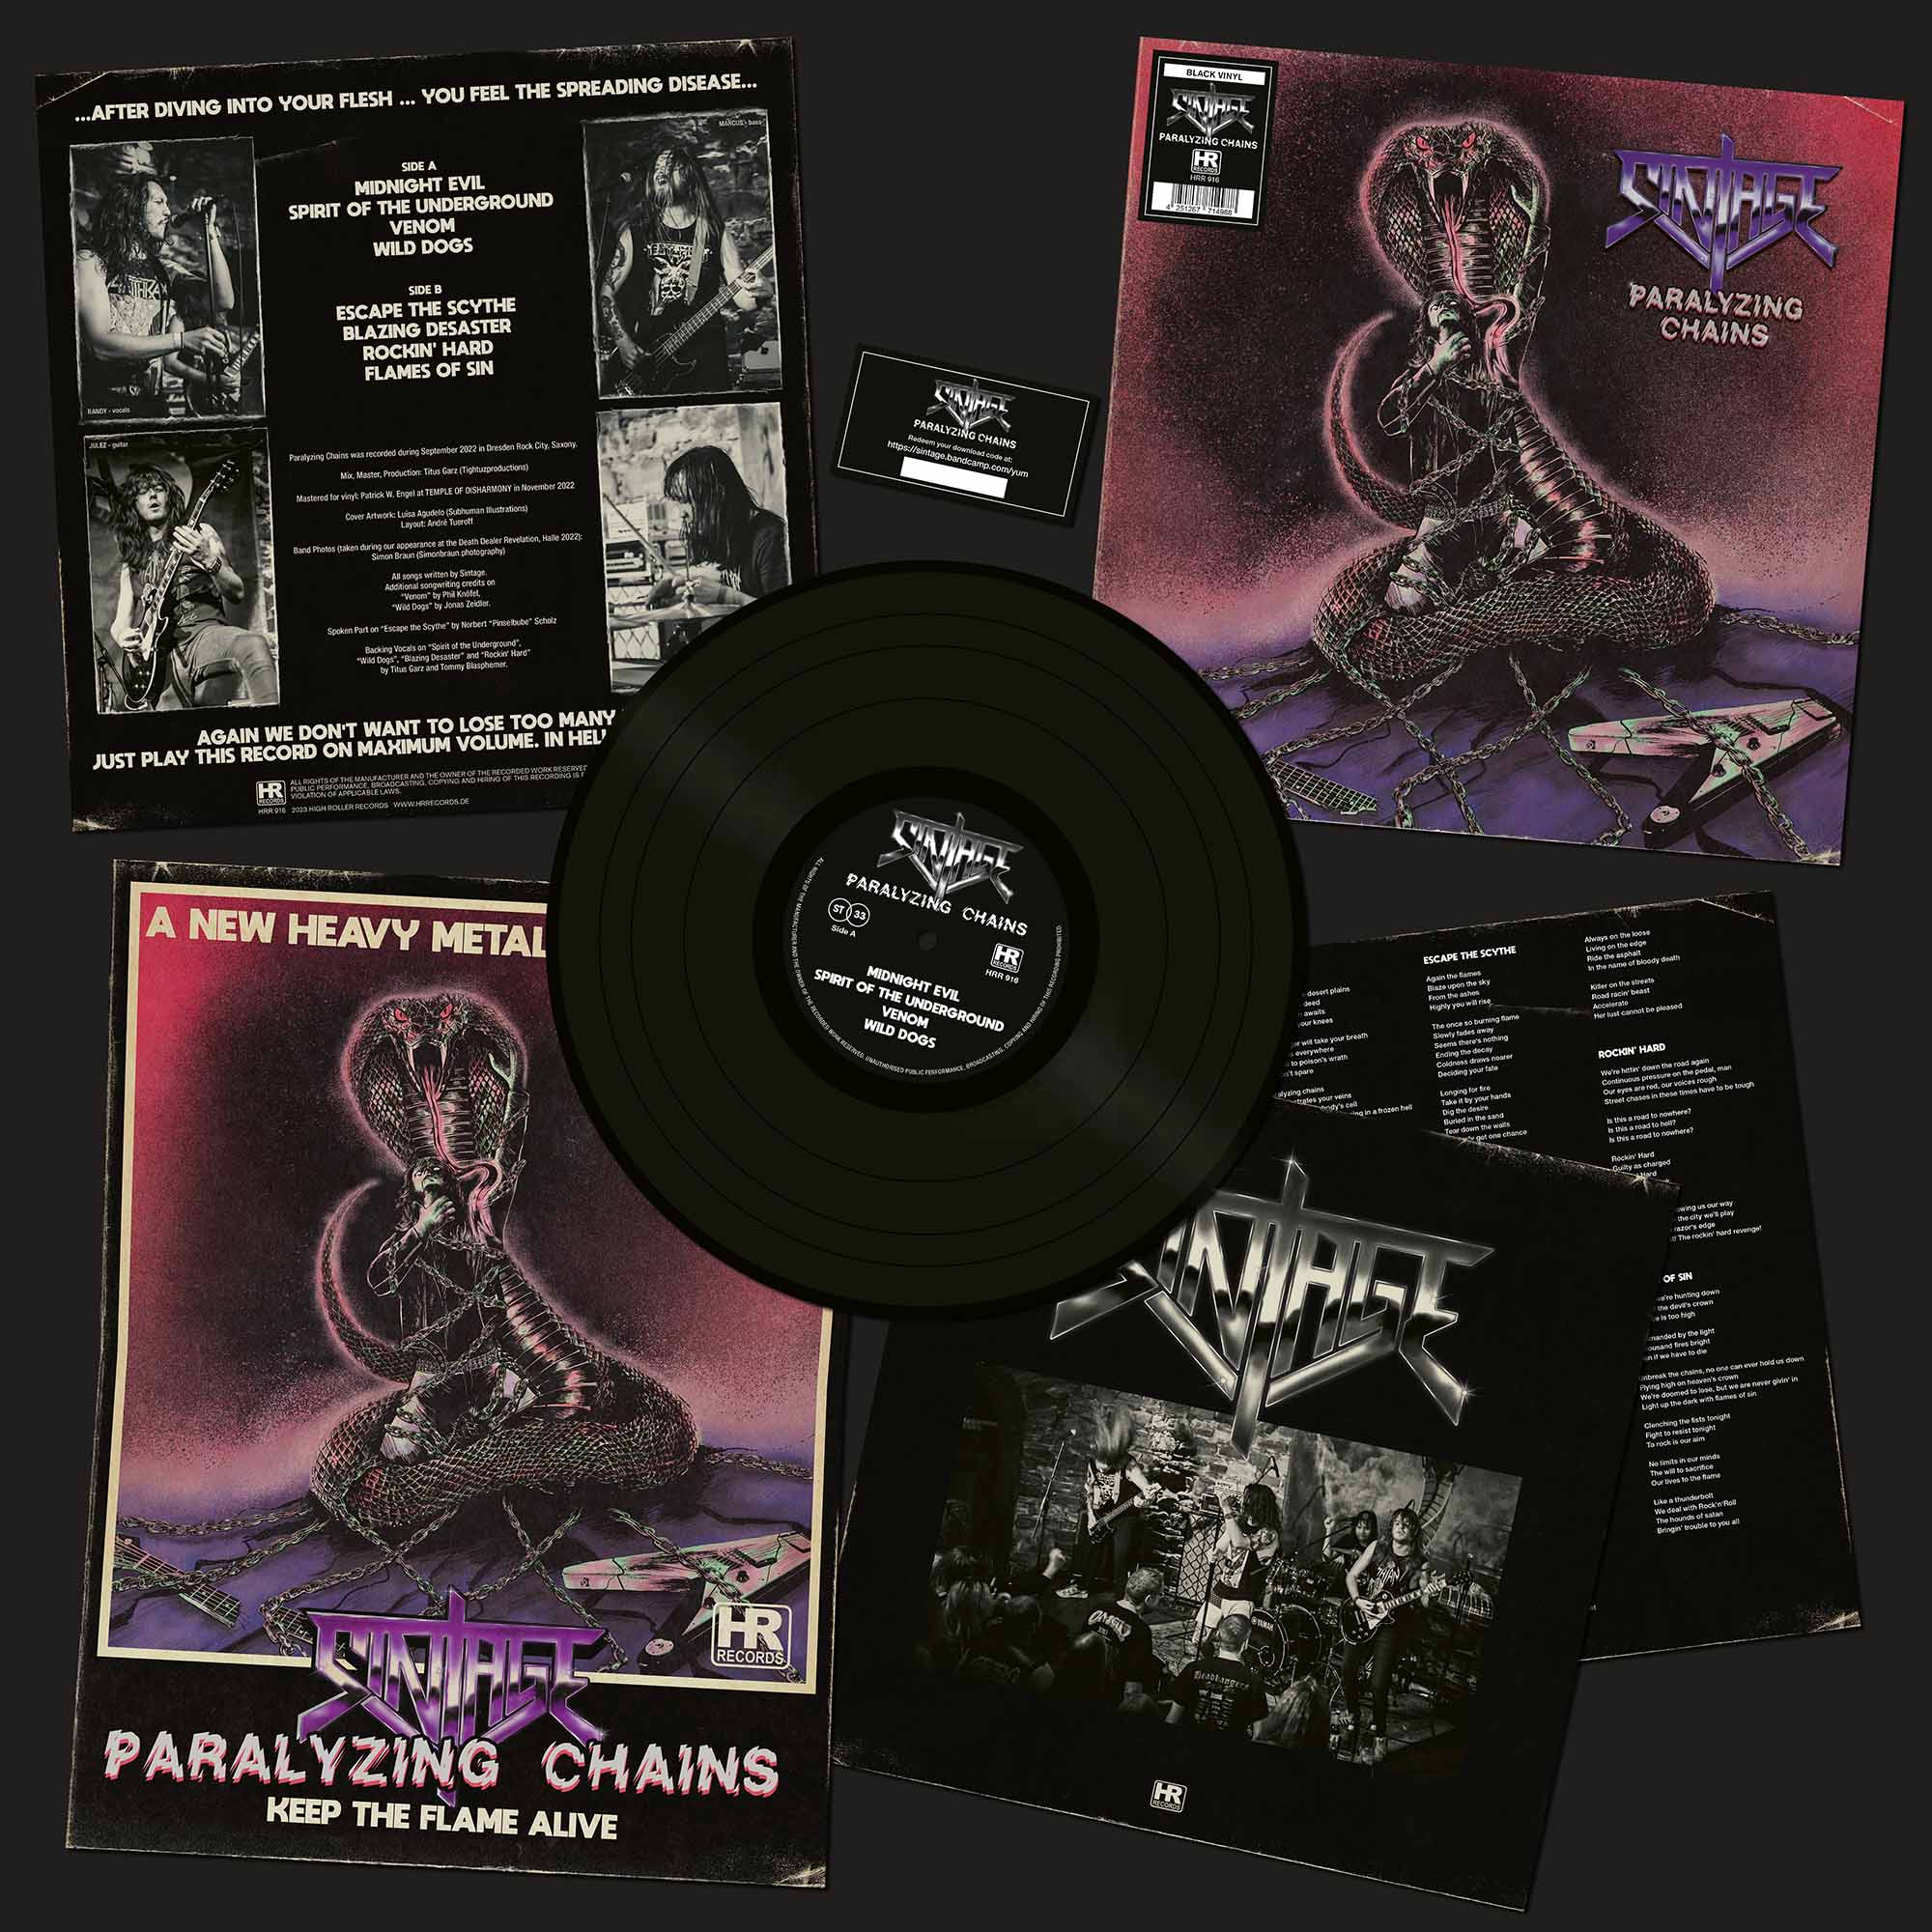 SINTAGE - Paralyzing Chains  LP